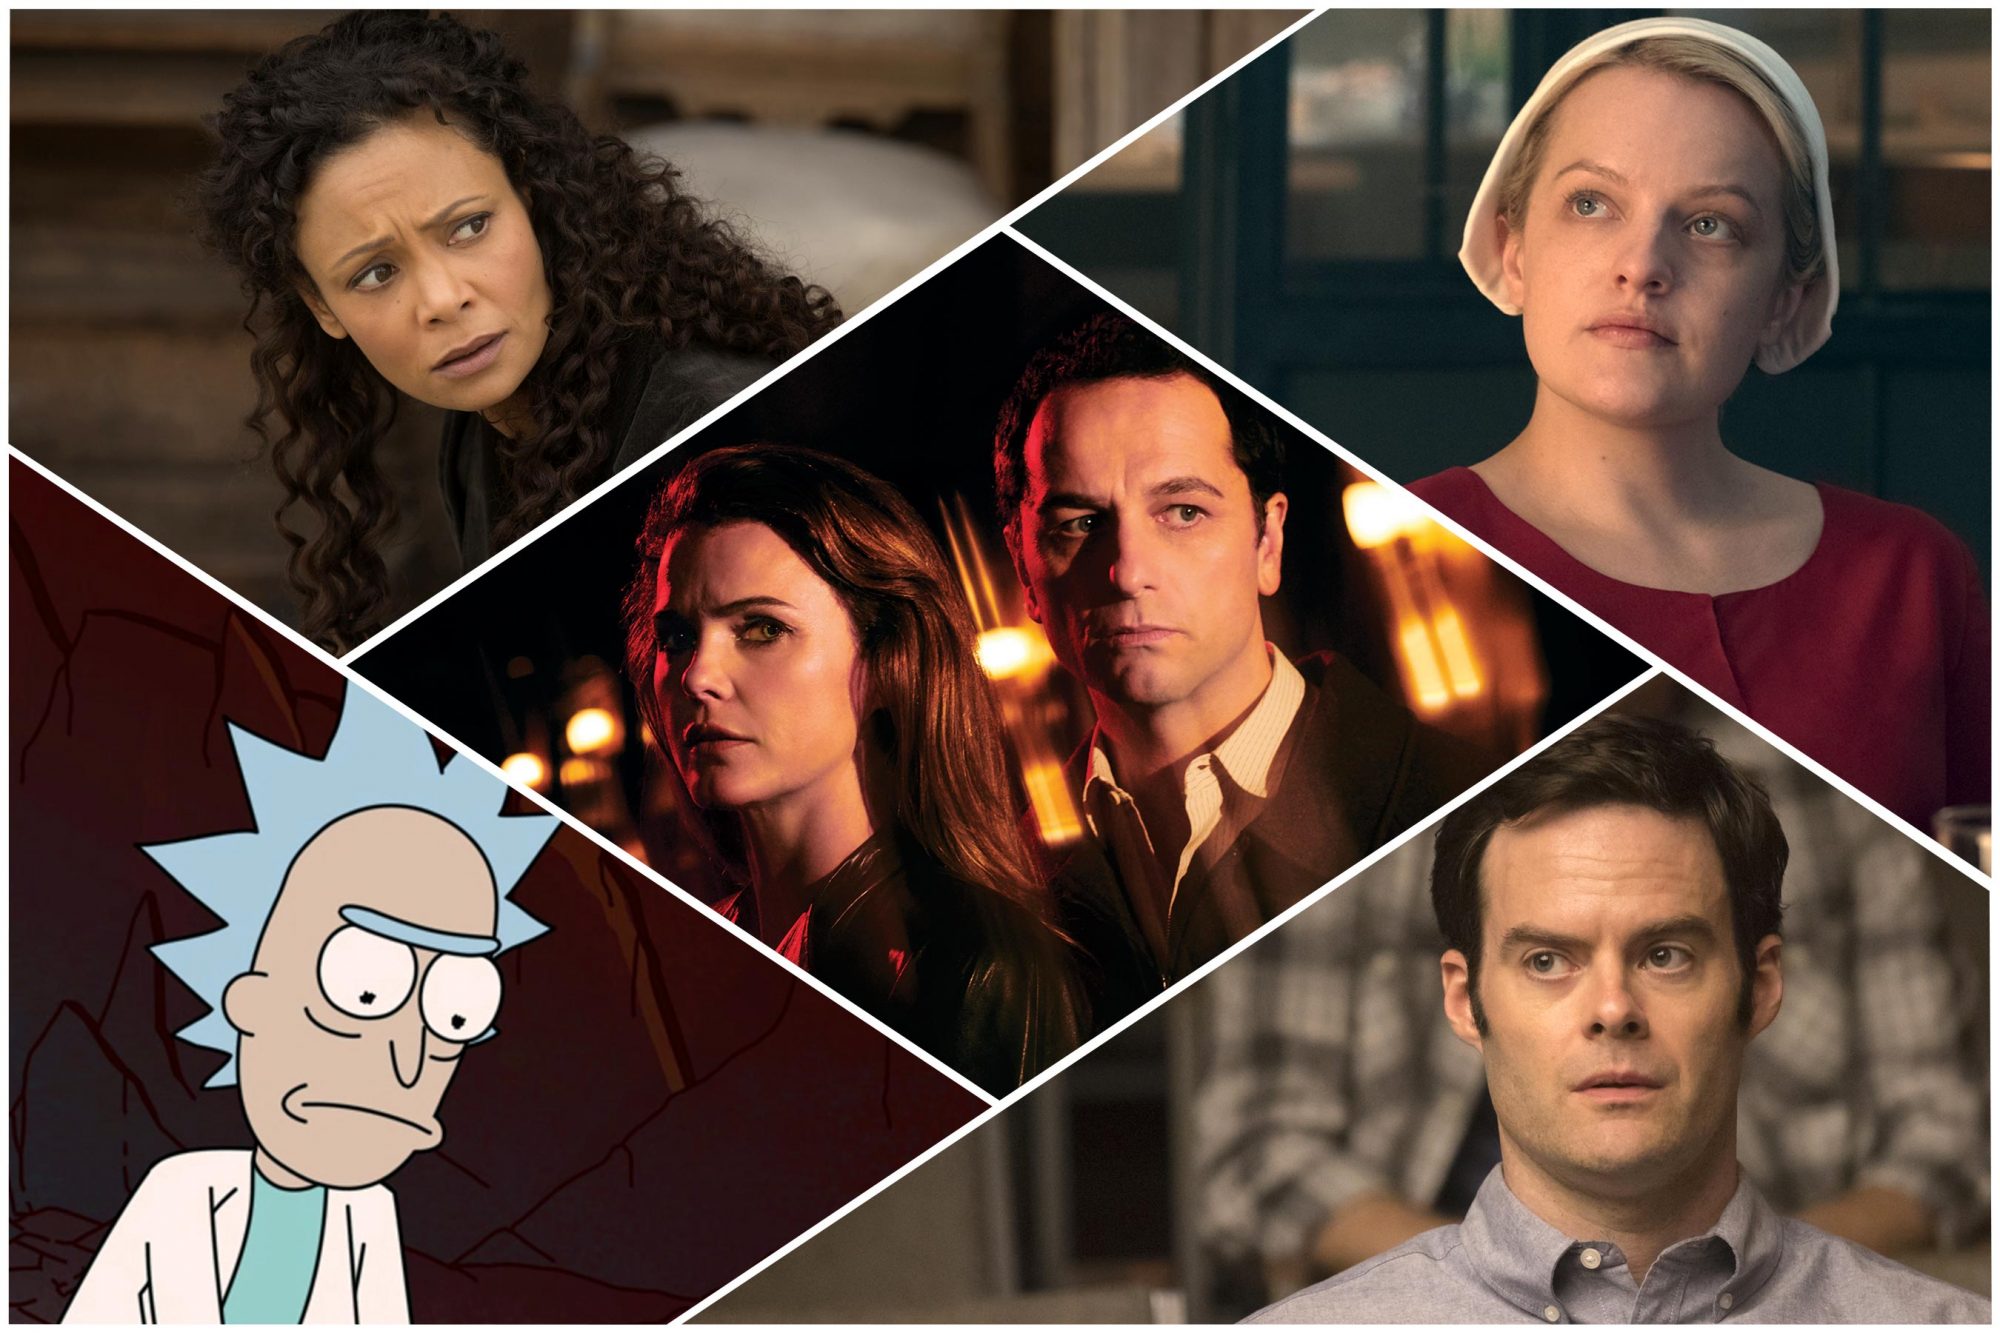 What to Watch: Here are the TV shows your favorite celebrities are binge-watching